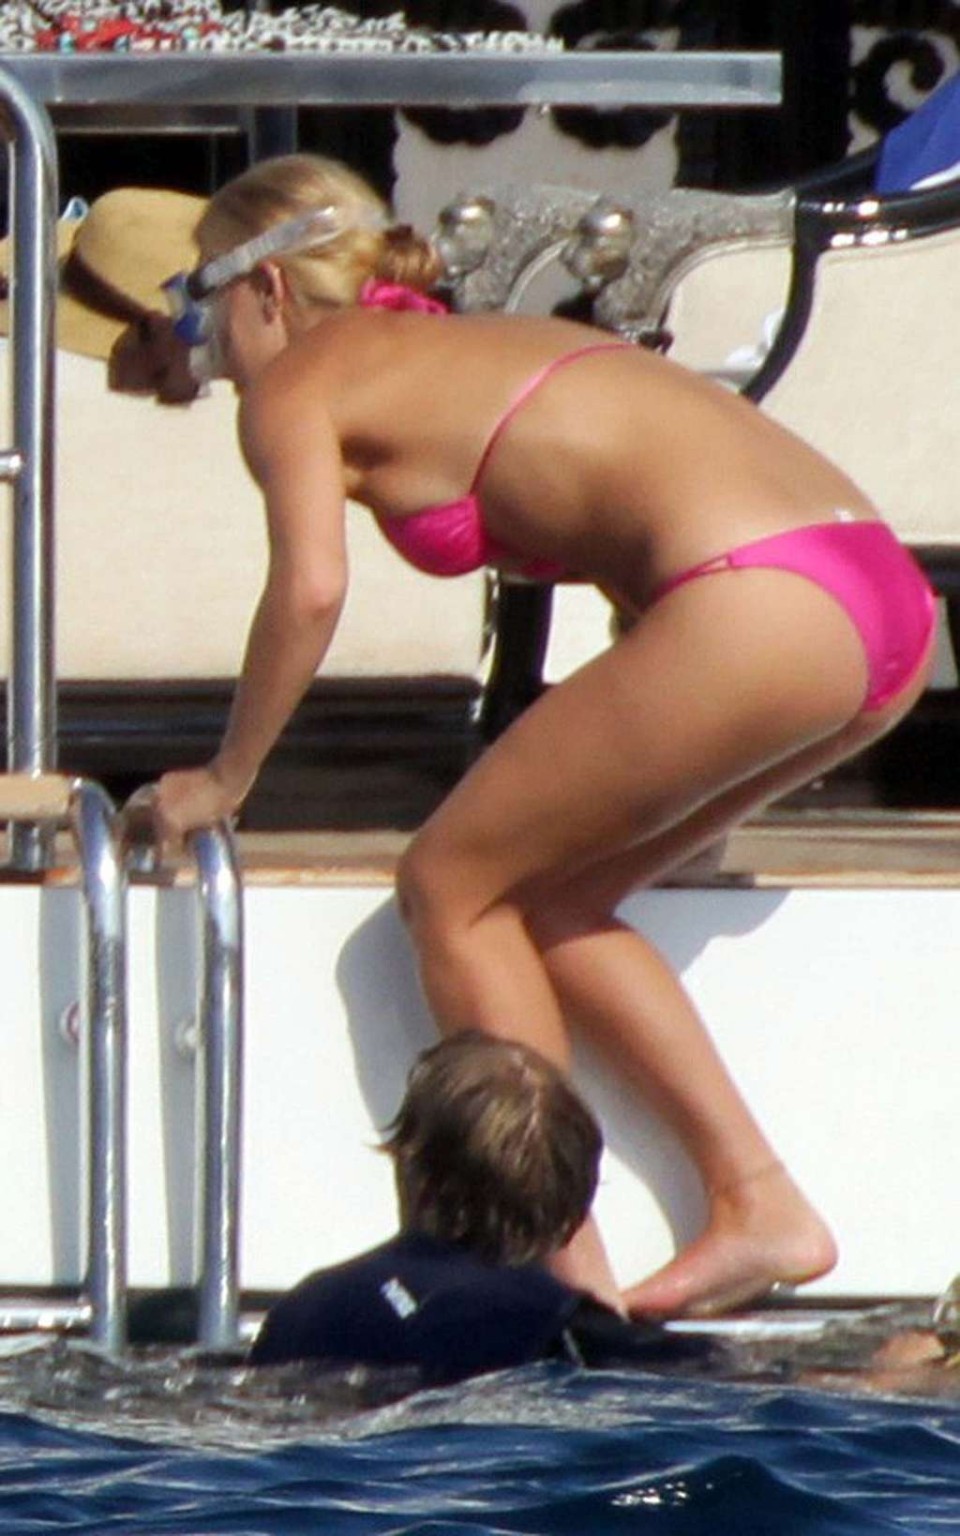 Bar Refaeli looking very sexy in red bikini on yacht paparazzi pictures #75336763